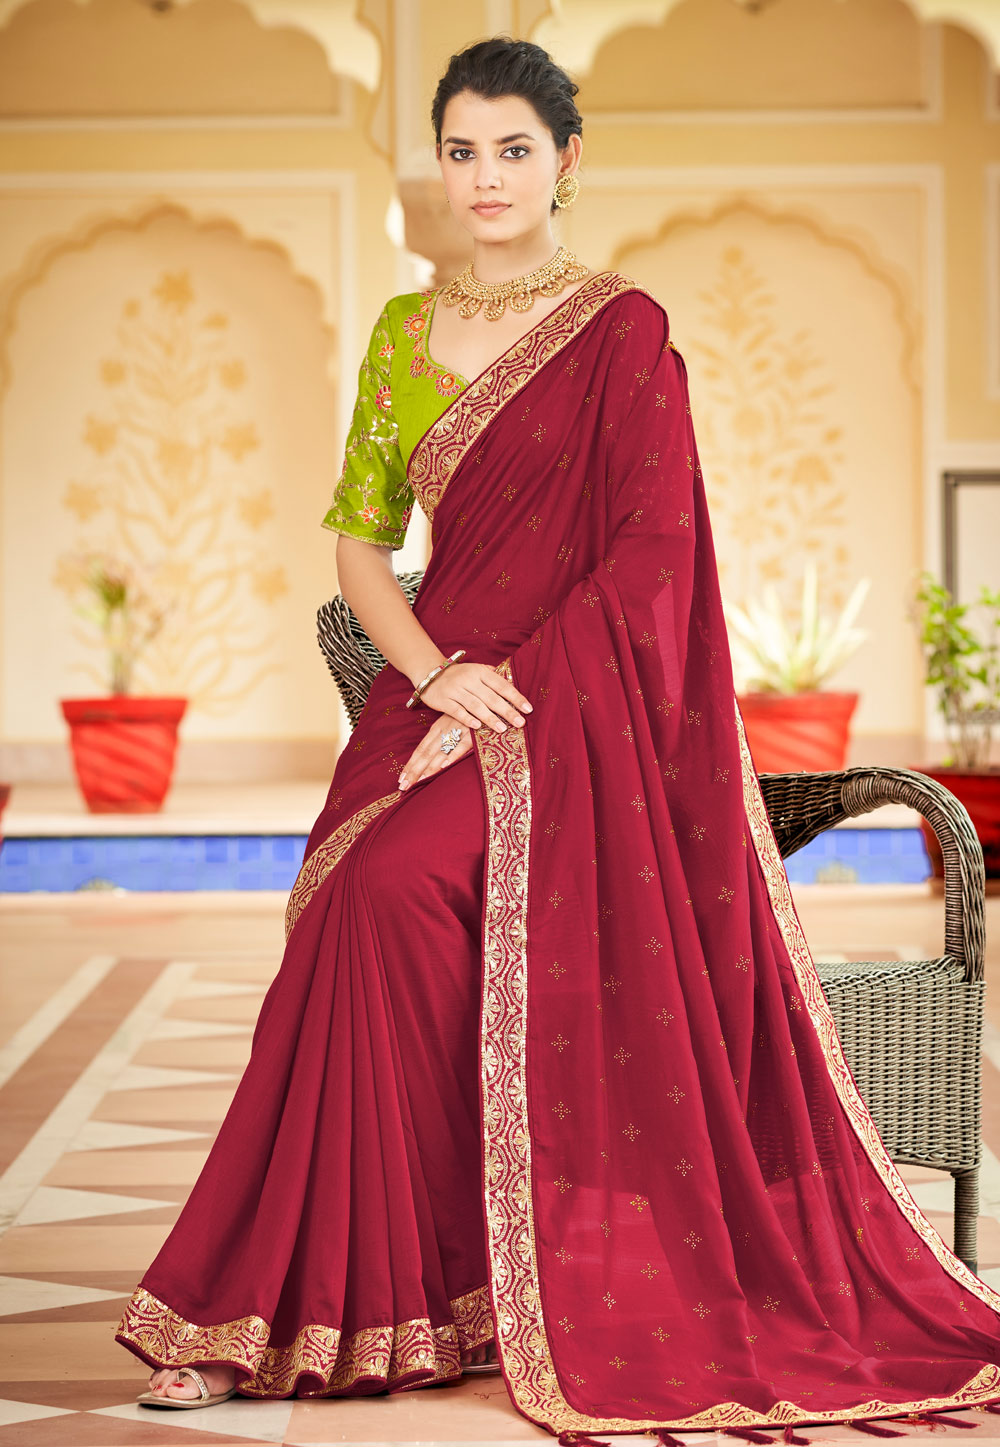 Melodic Light Blue Silk Saree with Maroon Blouse